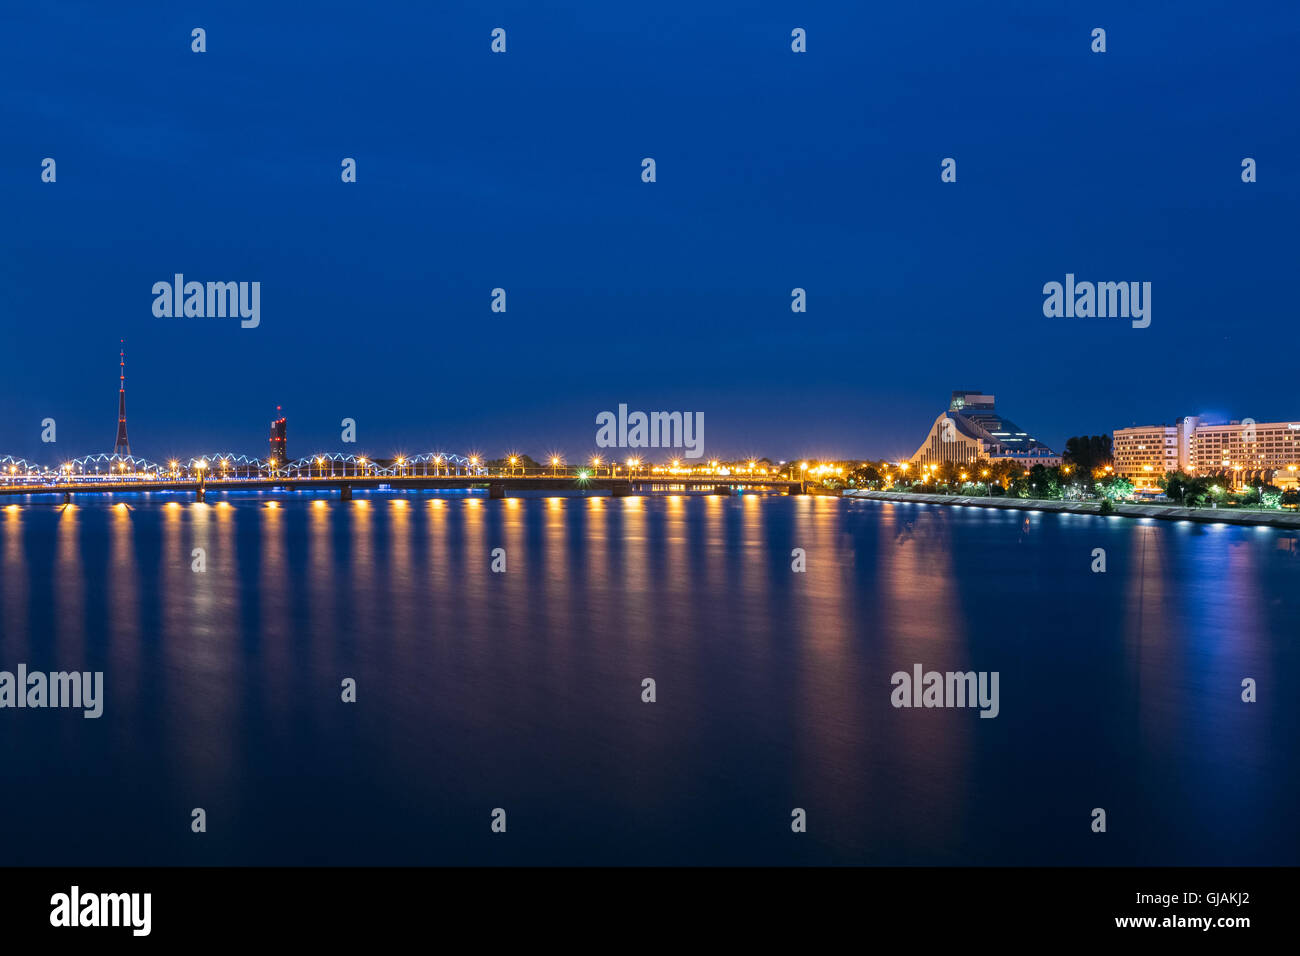 Night Cityscape Of Riga, Latvia. View On The National Library Of Latvia. Riga Radio & Tv Tower. Seafront. Copyspace. Travel Dest Stock Photo